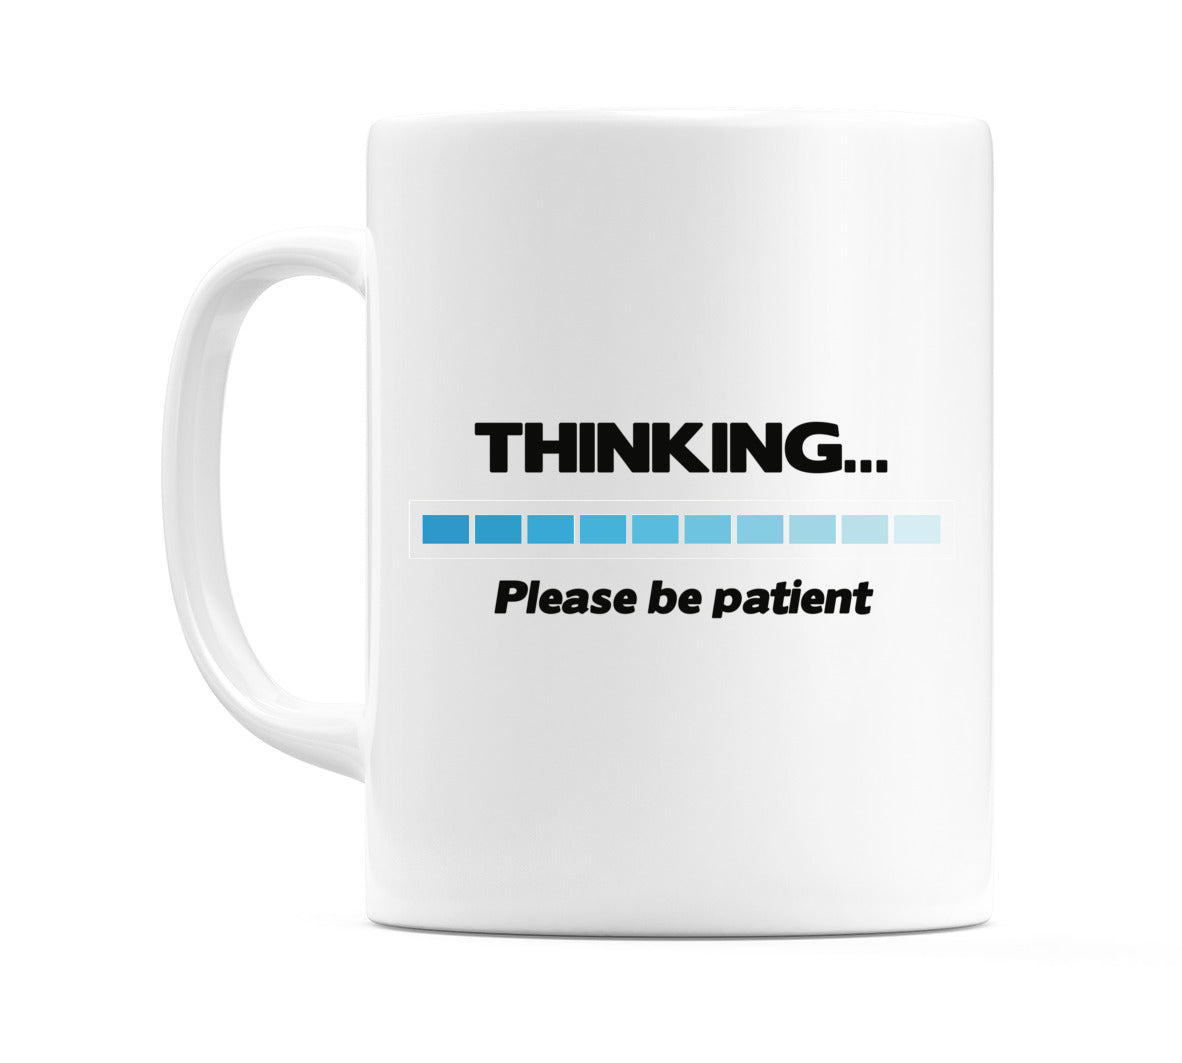 THINKING... Please be patient Mug